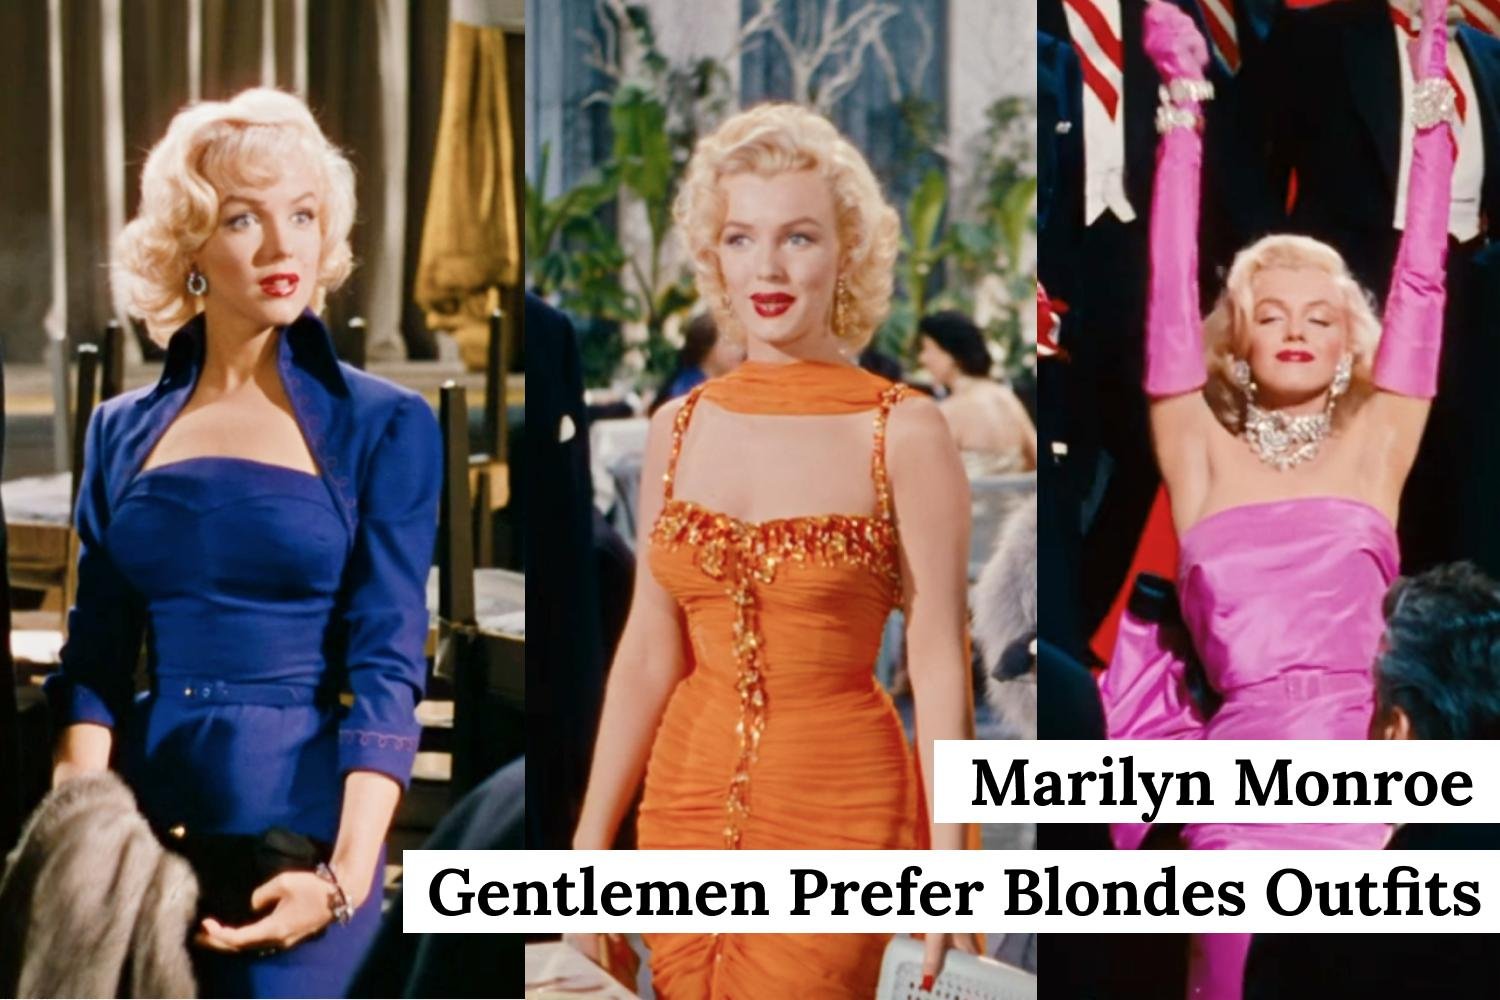 Marilyn Monroe Gentlemen Prefer Blondes Outfits - All her Gorgeous Glam Dresses — Classic Critics Corner